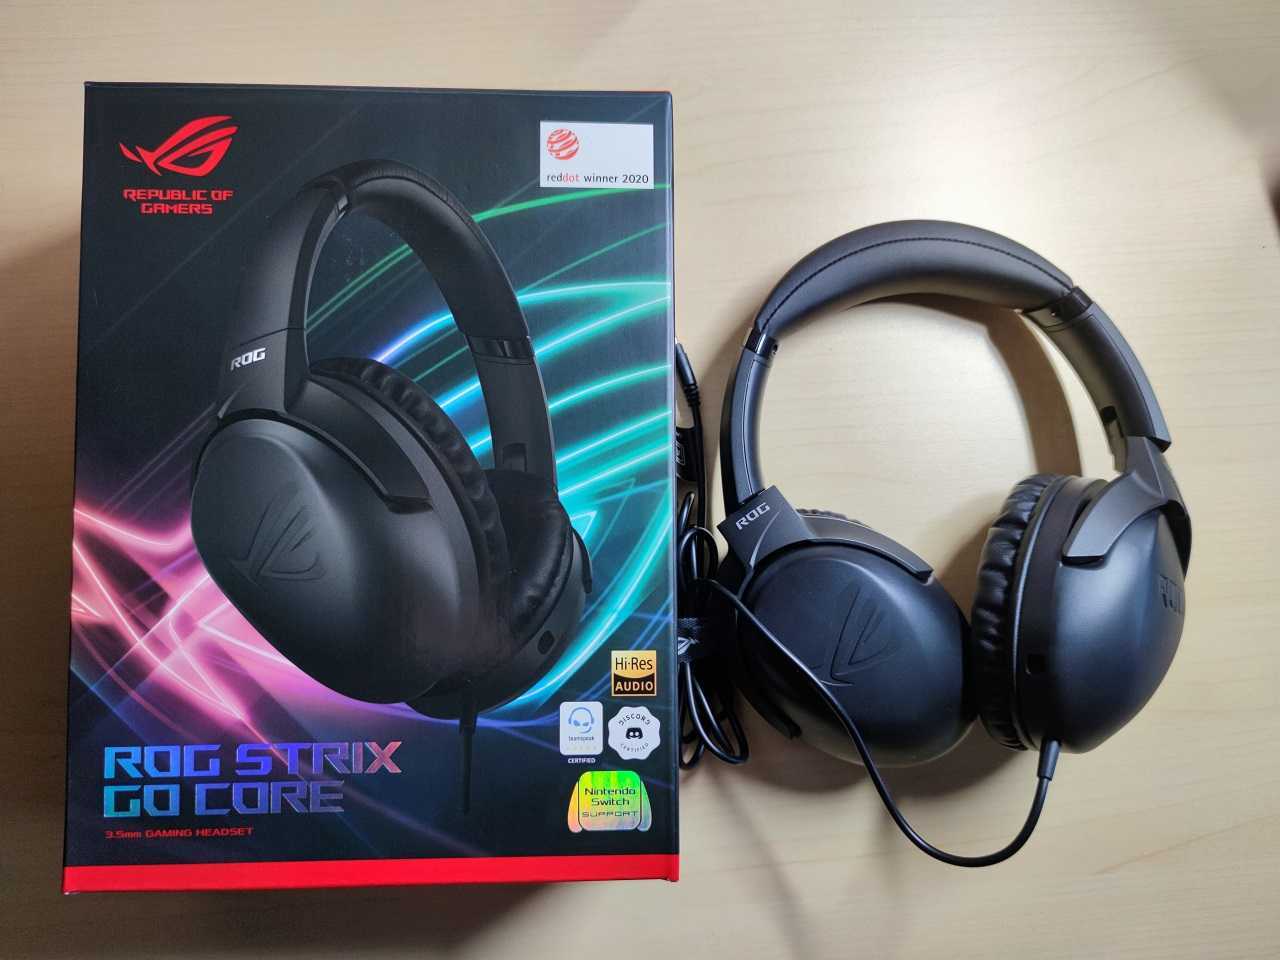 Asus Strix Go Core review: gaming headphones with great potential 